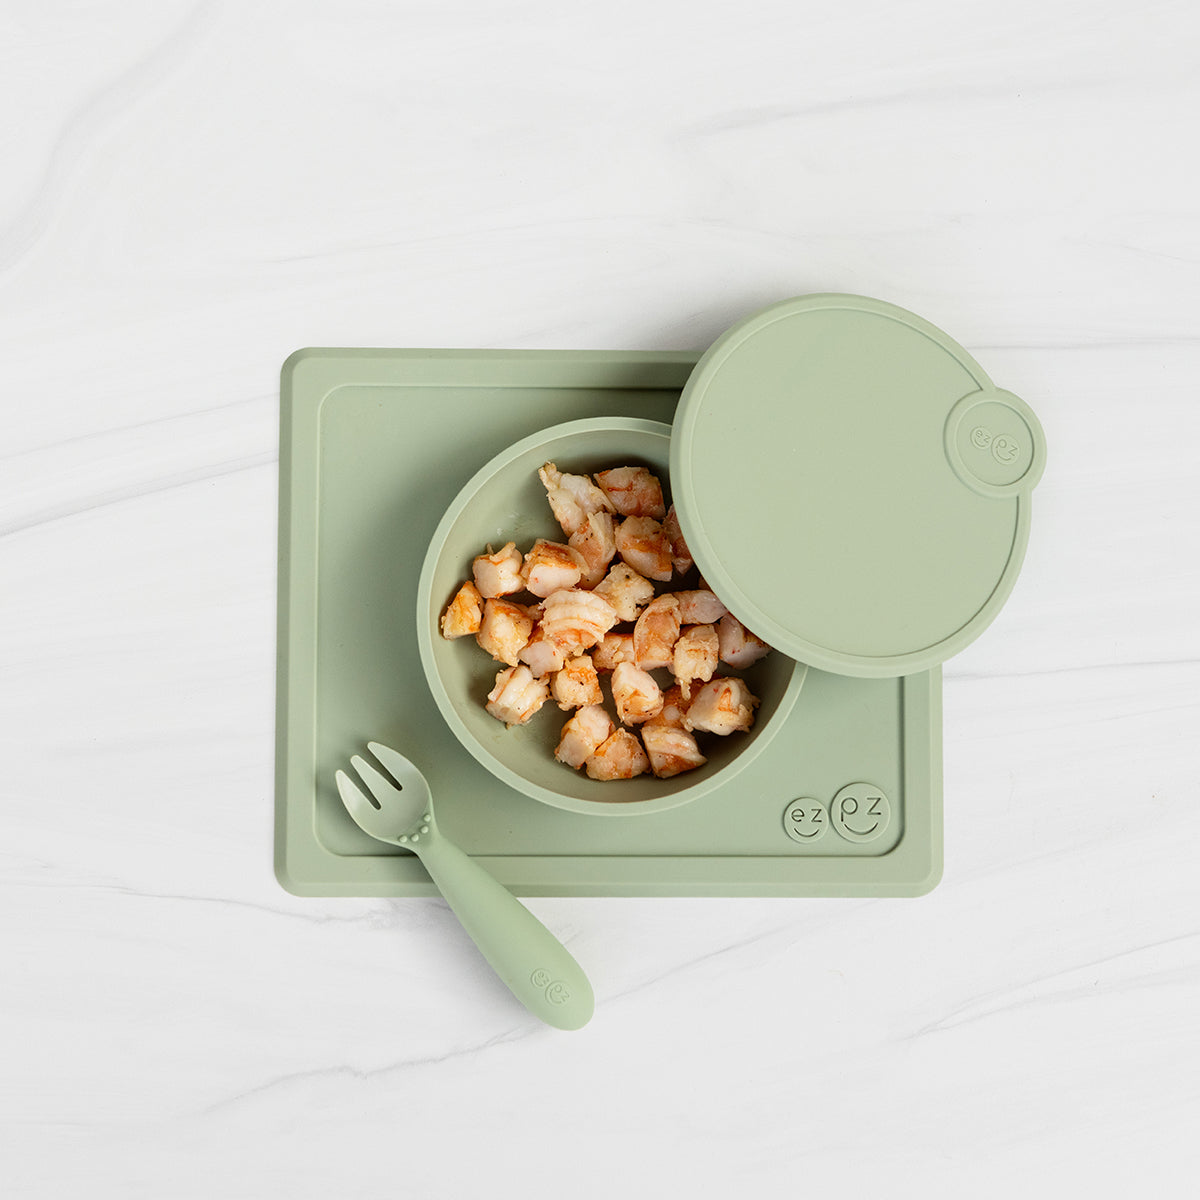 Mini Bowl Lid in Sage by ezpz / The Original All-In-One Silicone Plates & Placemats that Stick to the Table